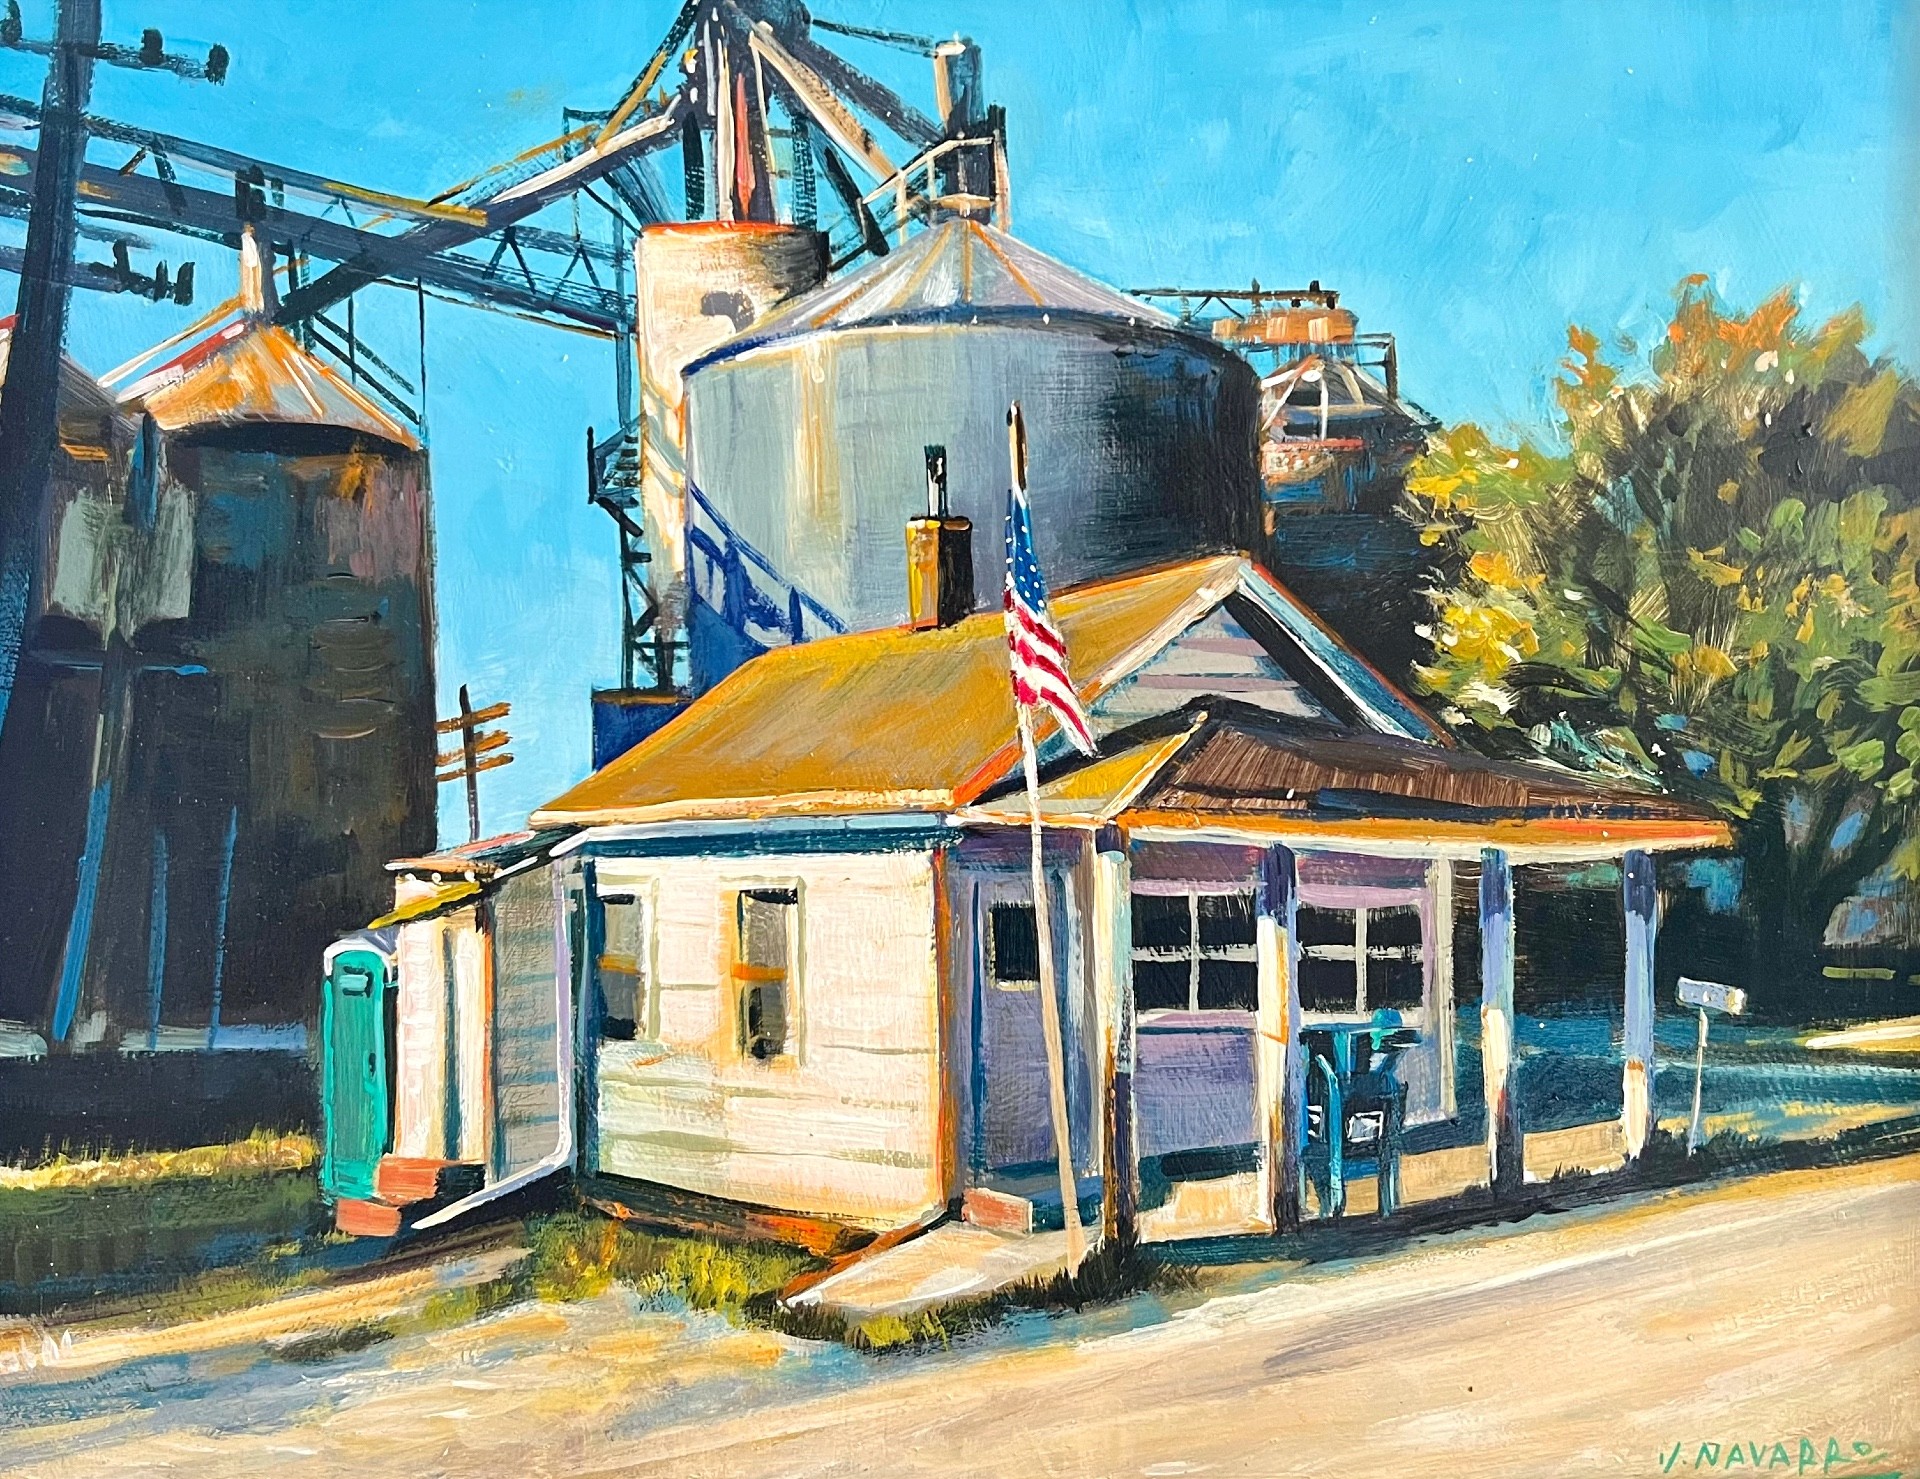 Jimmy Navarro (Des Moines, Iowa), “Small Town Post Office,” Acrylic, 9x12 in.